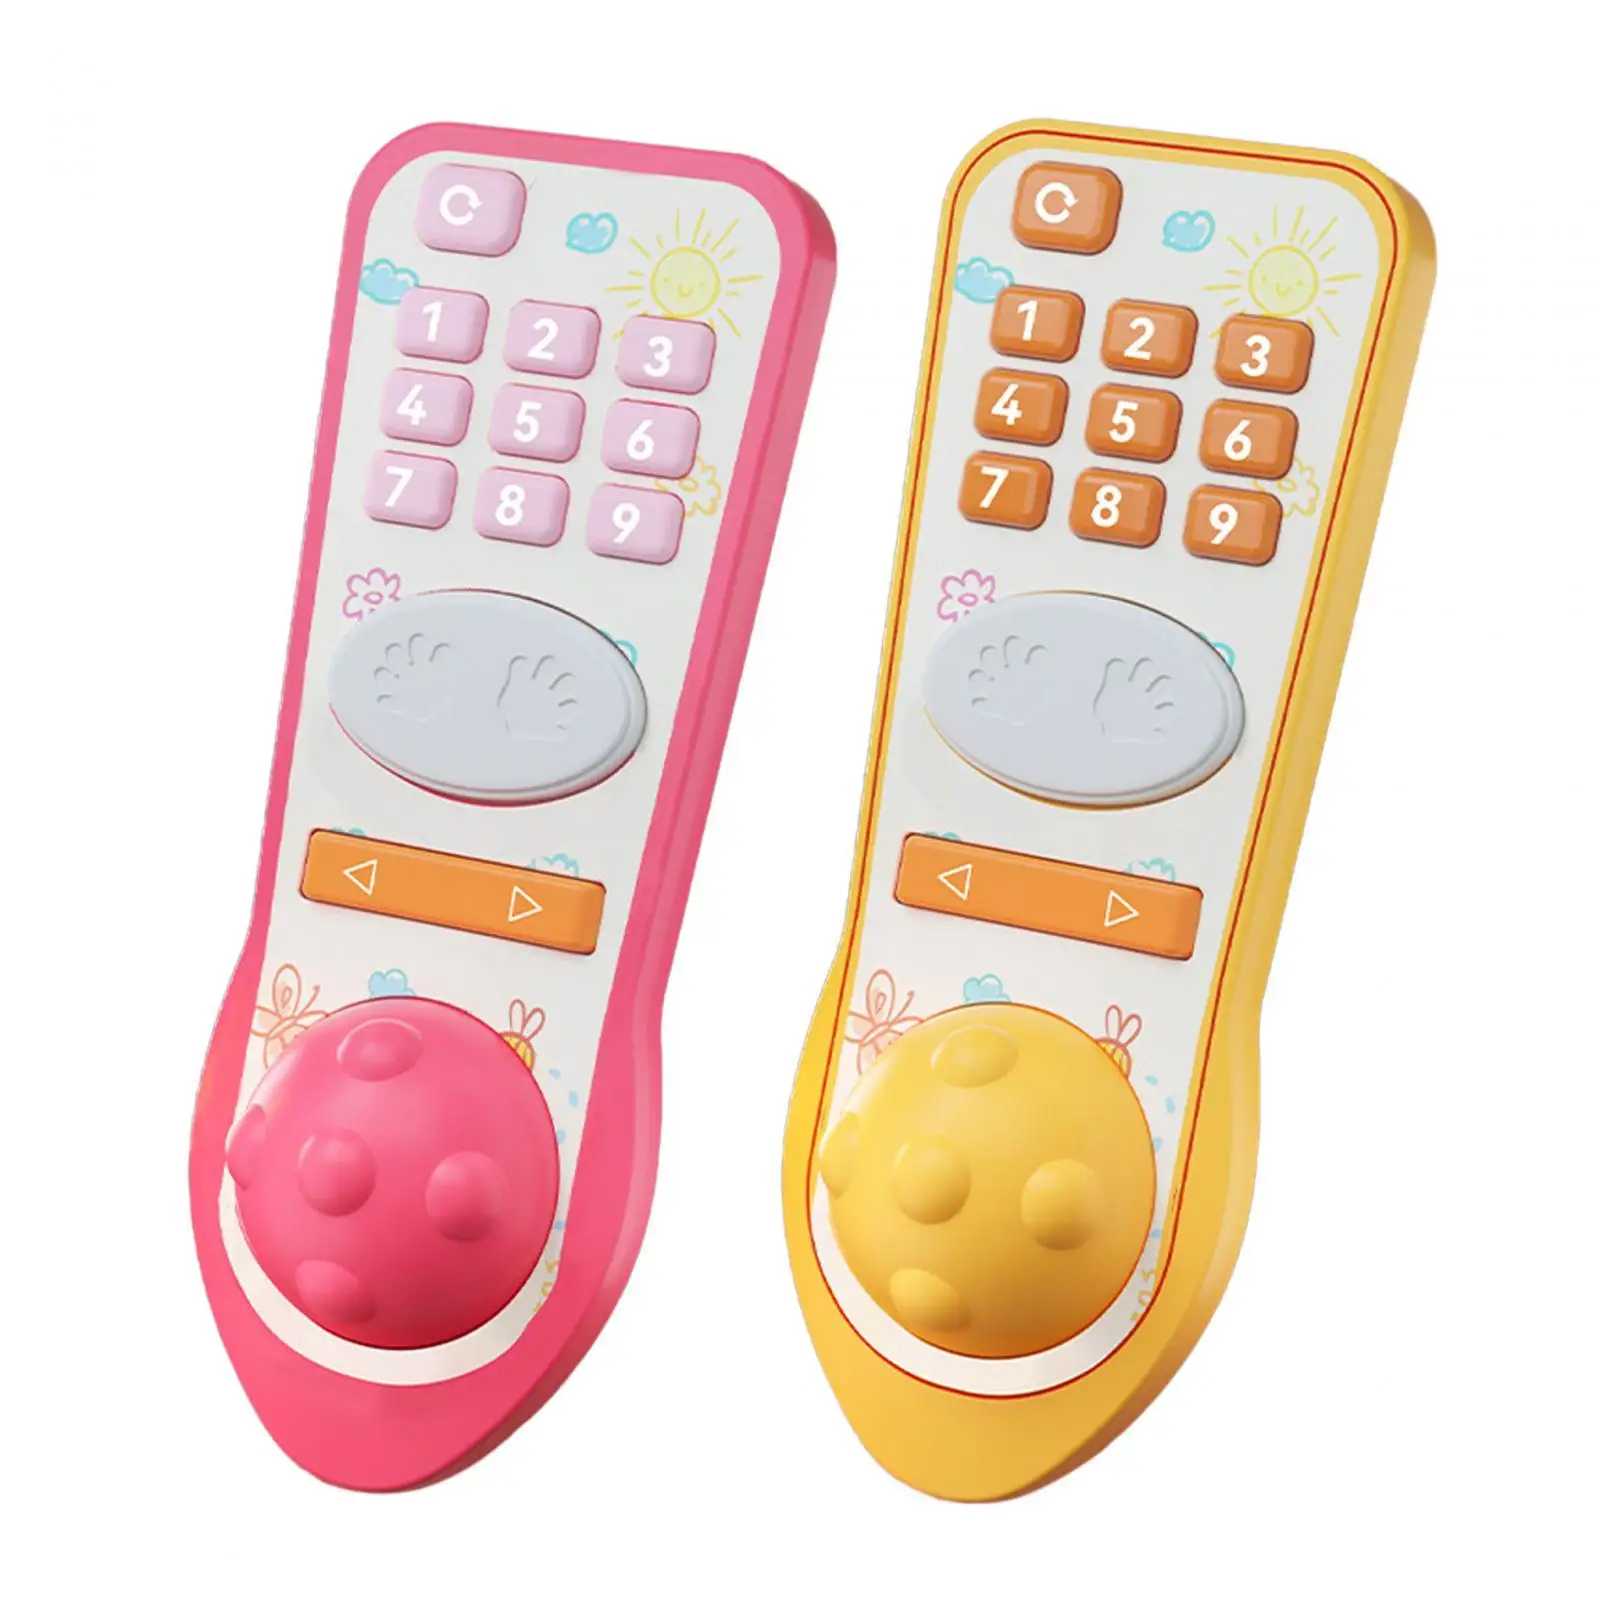 TV Remote Control Toy Durable with Soft Light and Sound Remote Toy Early Educational for Infants Baby 12 to 18 Months Boys Girls